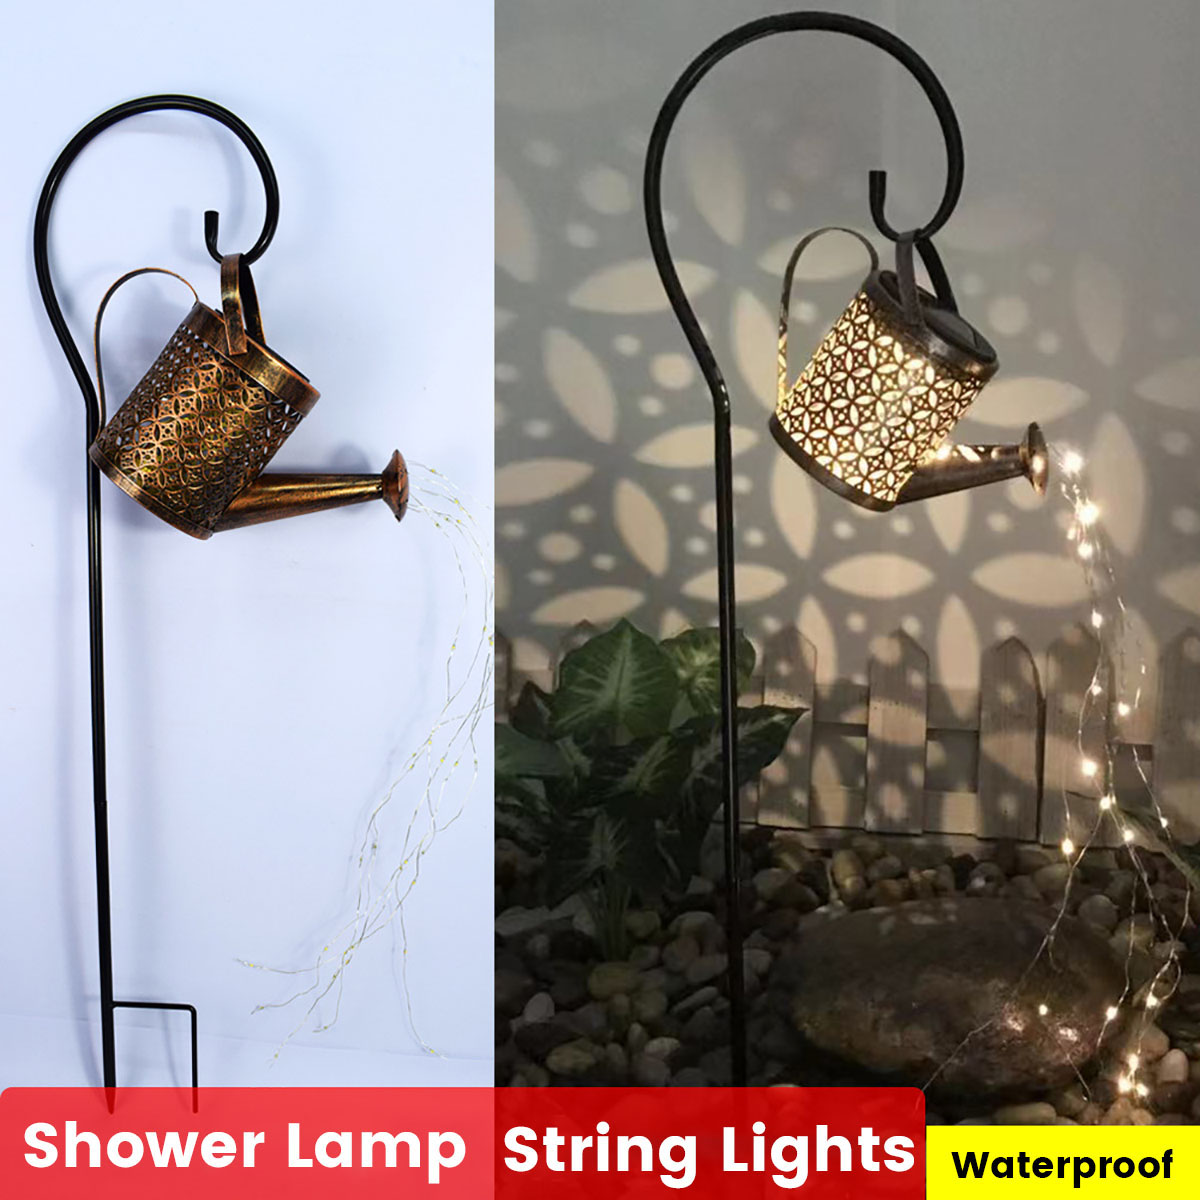 Solar-Light-Art-Lamp-Powered-LED-Fairy-Copper-Wire-Waterproof-String-Lights-Watering-Can-Outdoor-Gar-1878372-1